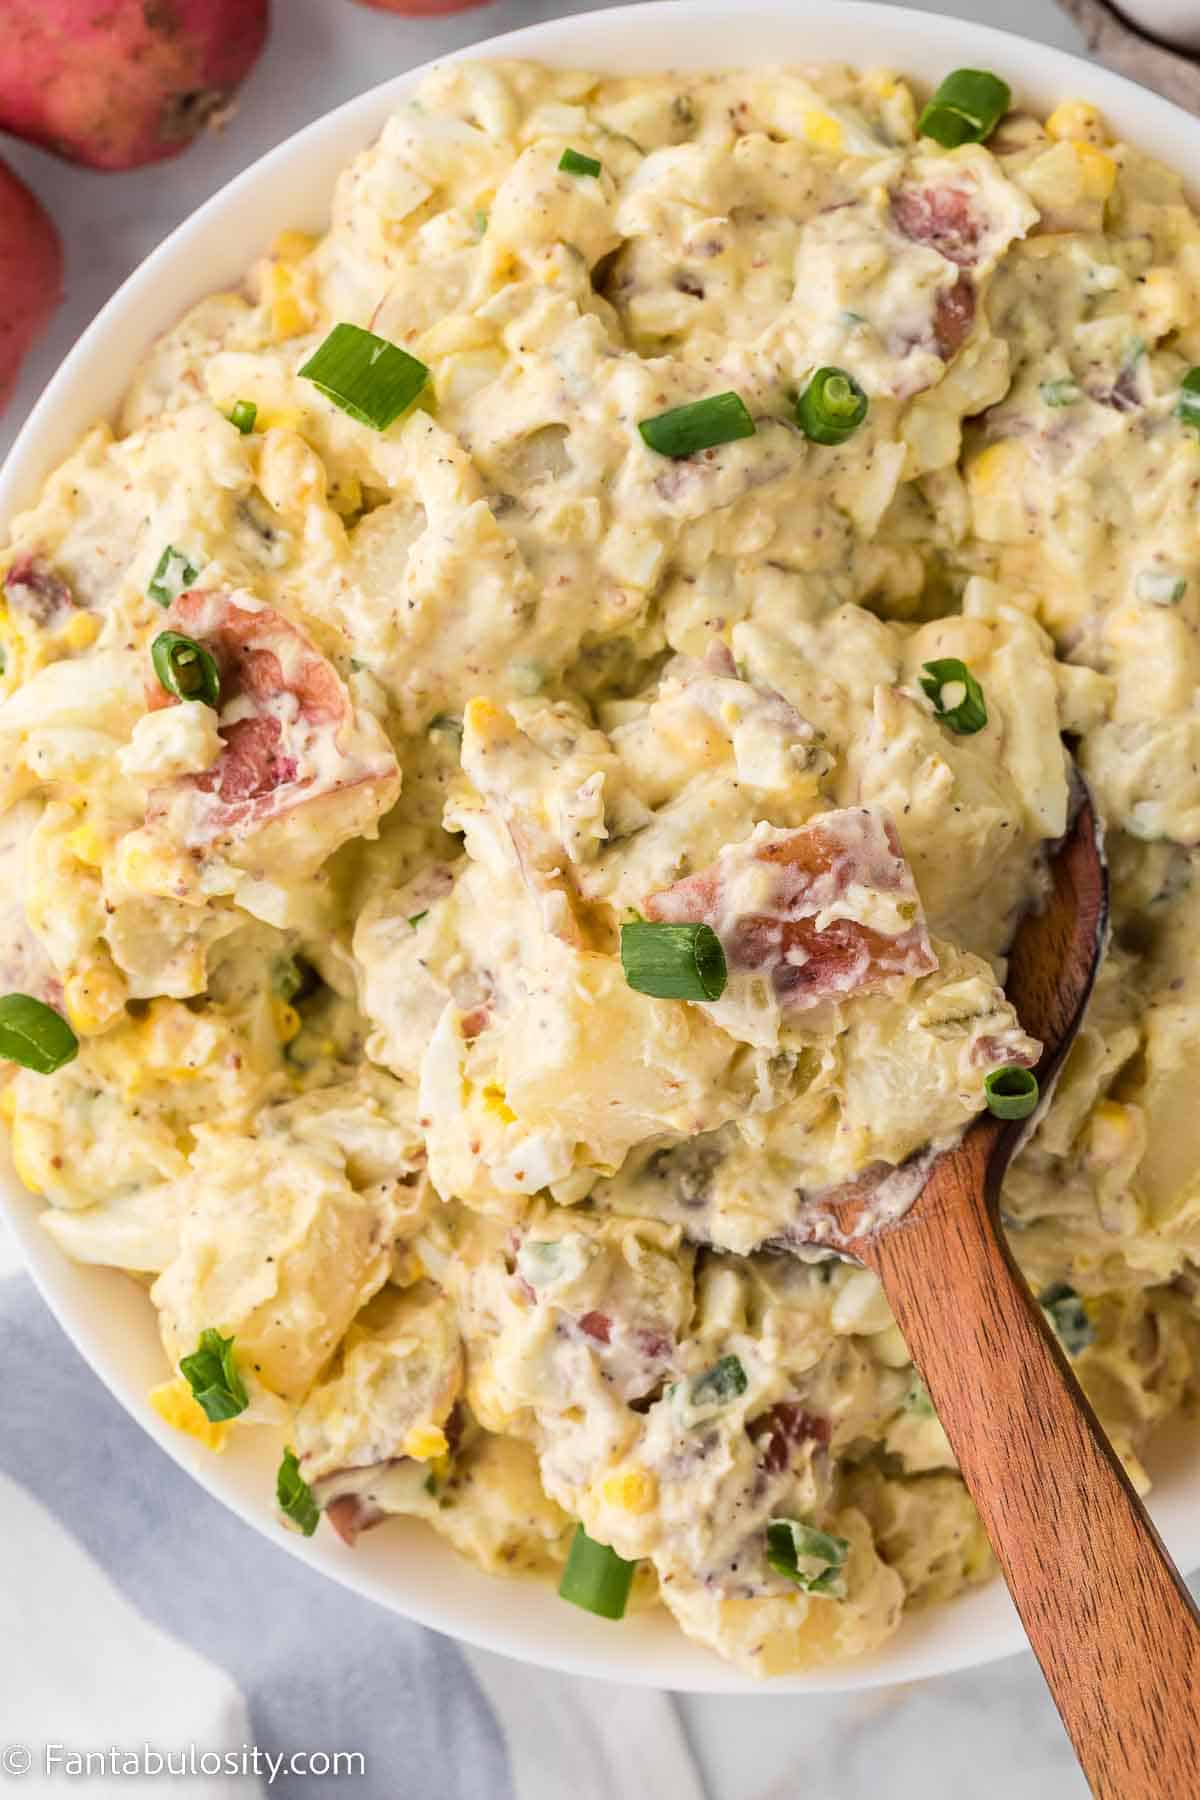 Red skin potato salad in large white serving bowl with wooden spoon.